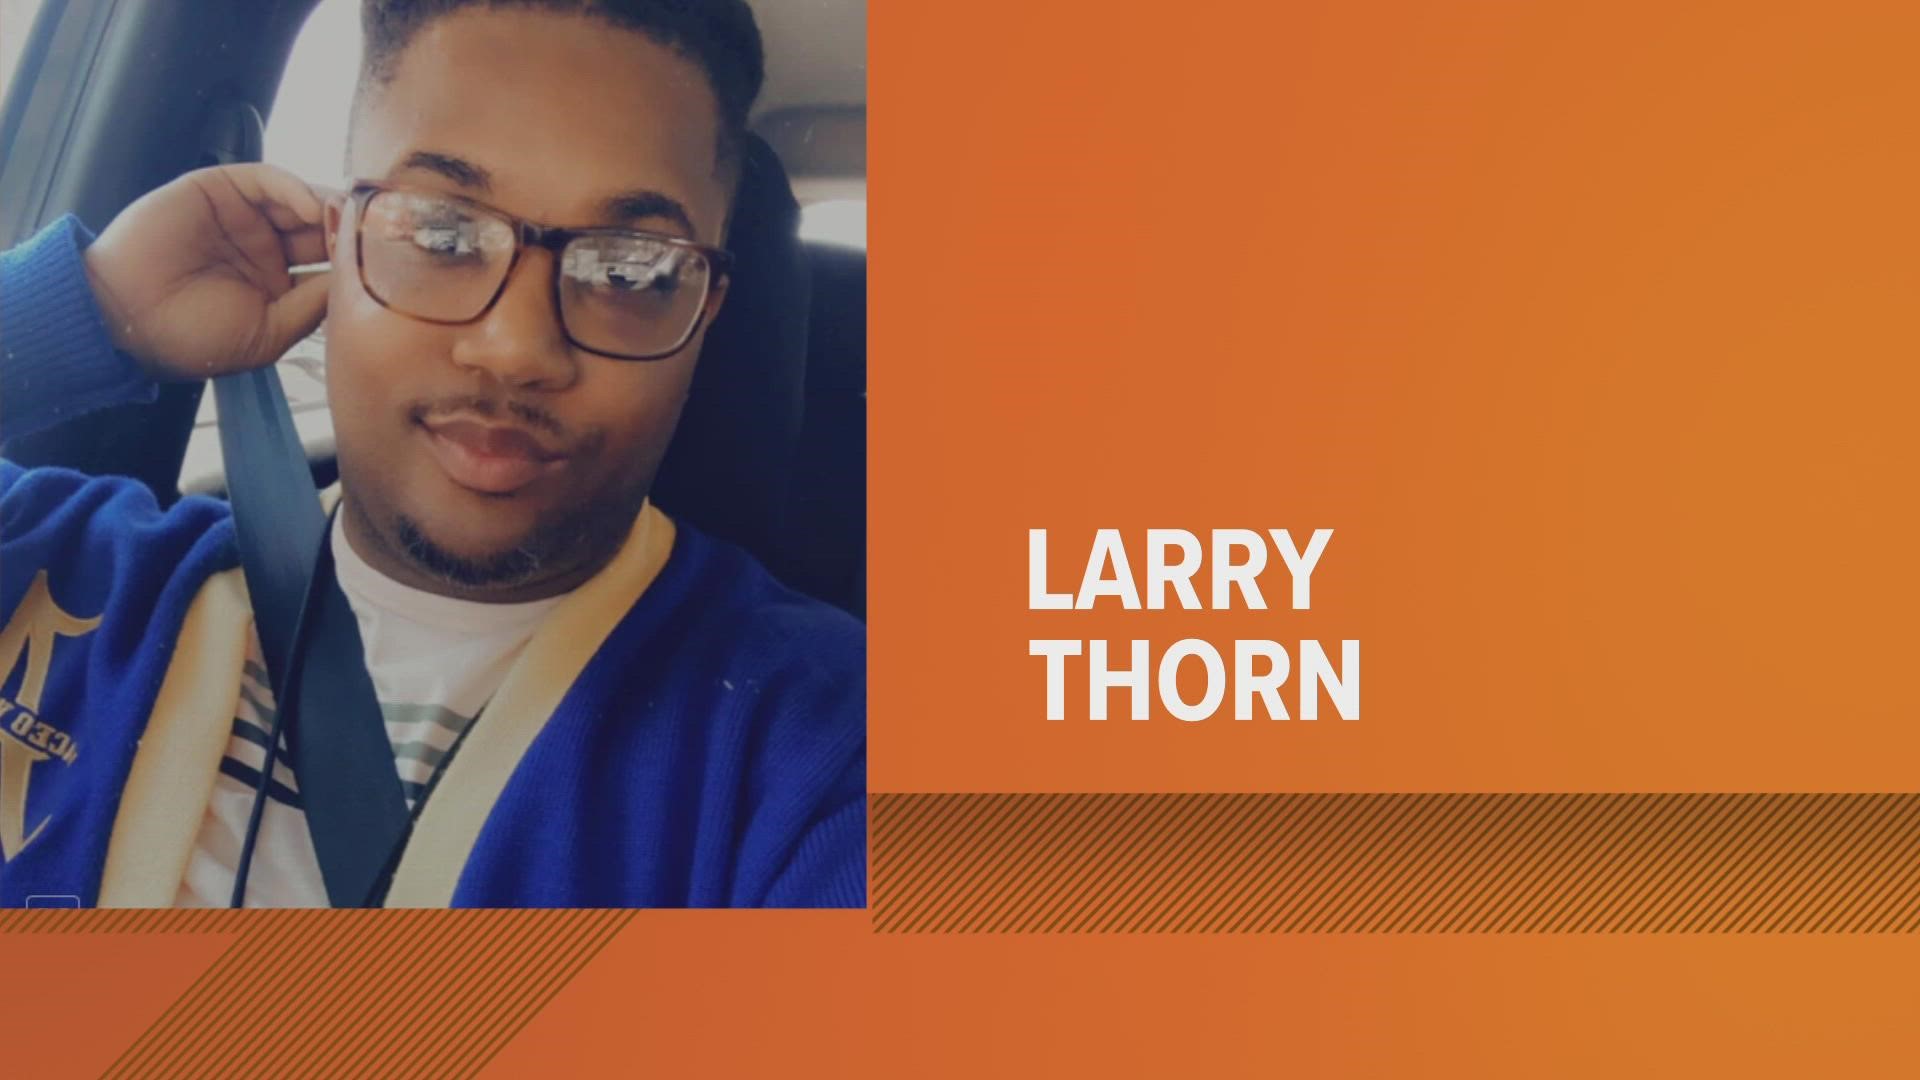 Larry Thorn was a secretary at A Maceo Walker Middle School.